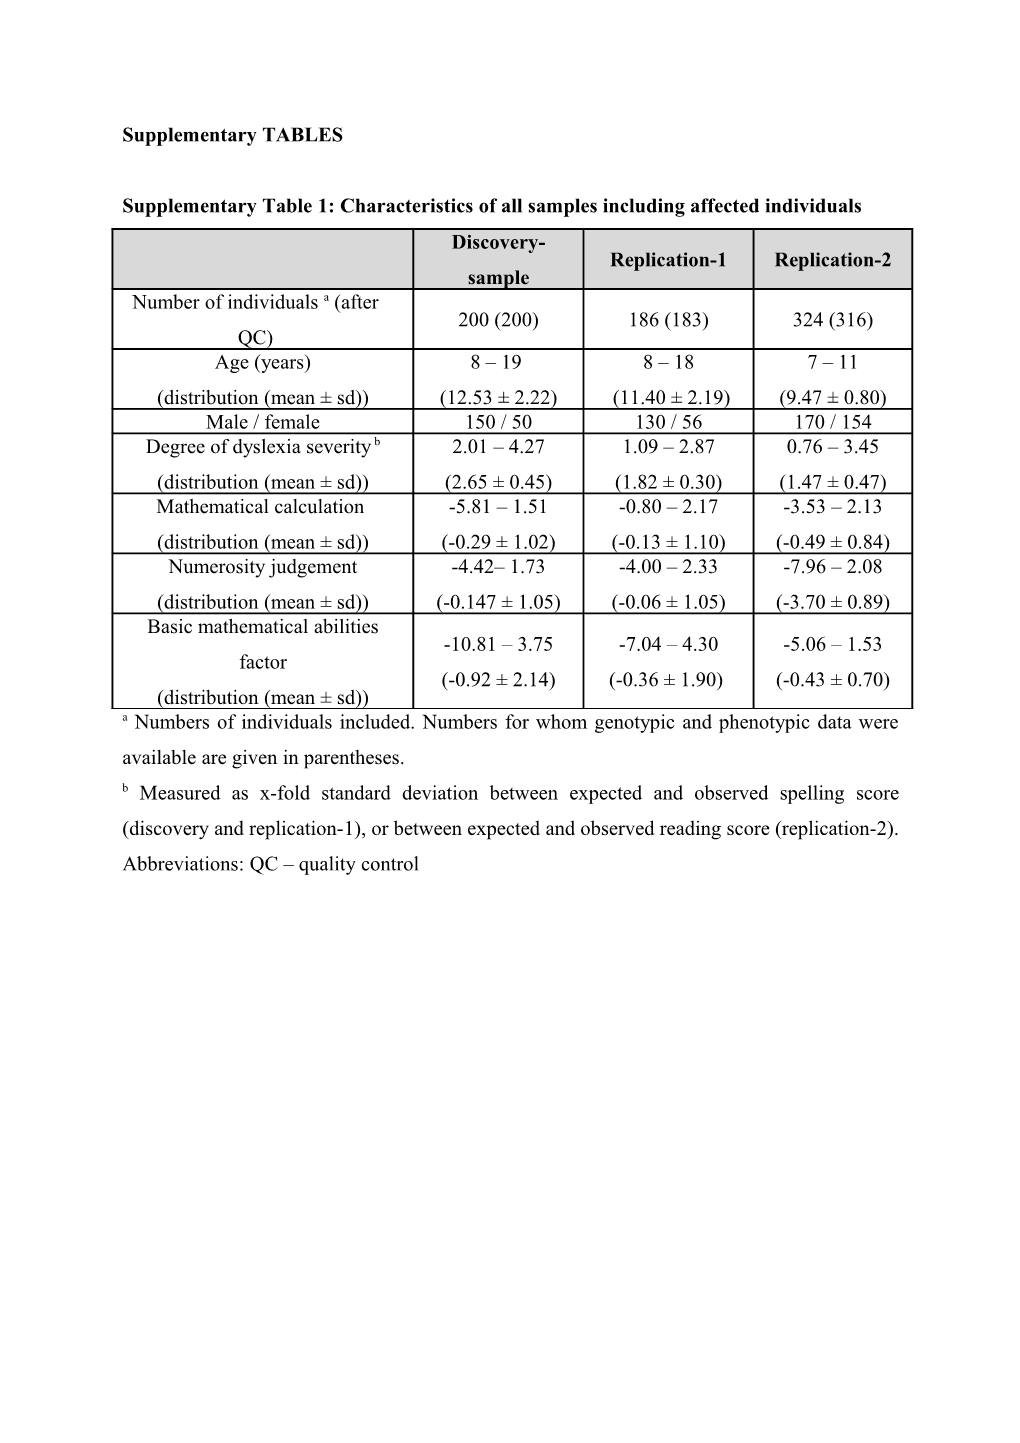 Supplementary Table 1: Characteristics of All Samples Including Affected Individuals